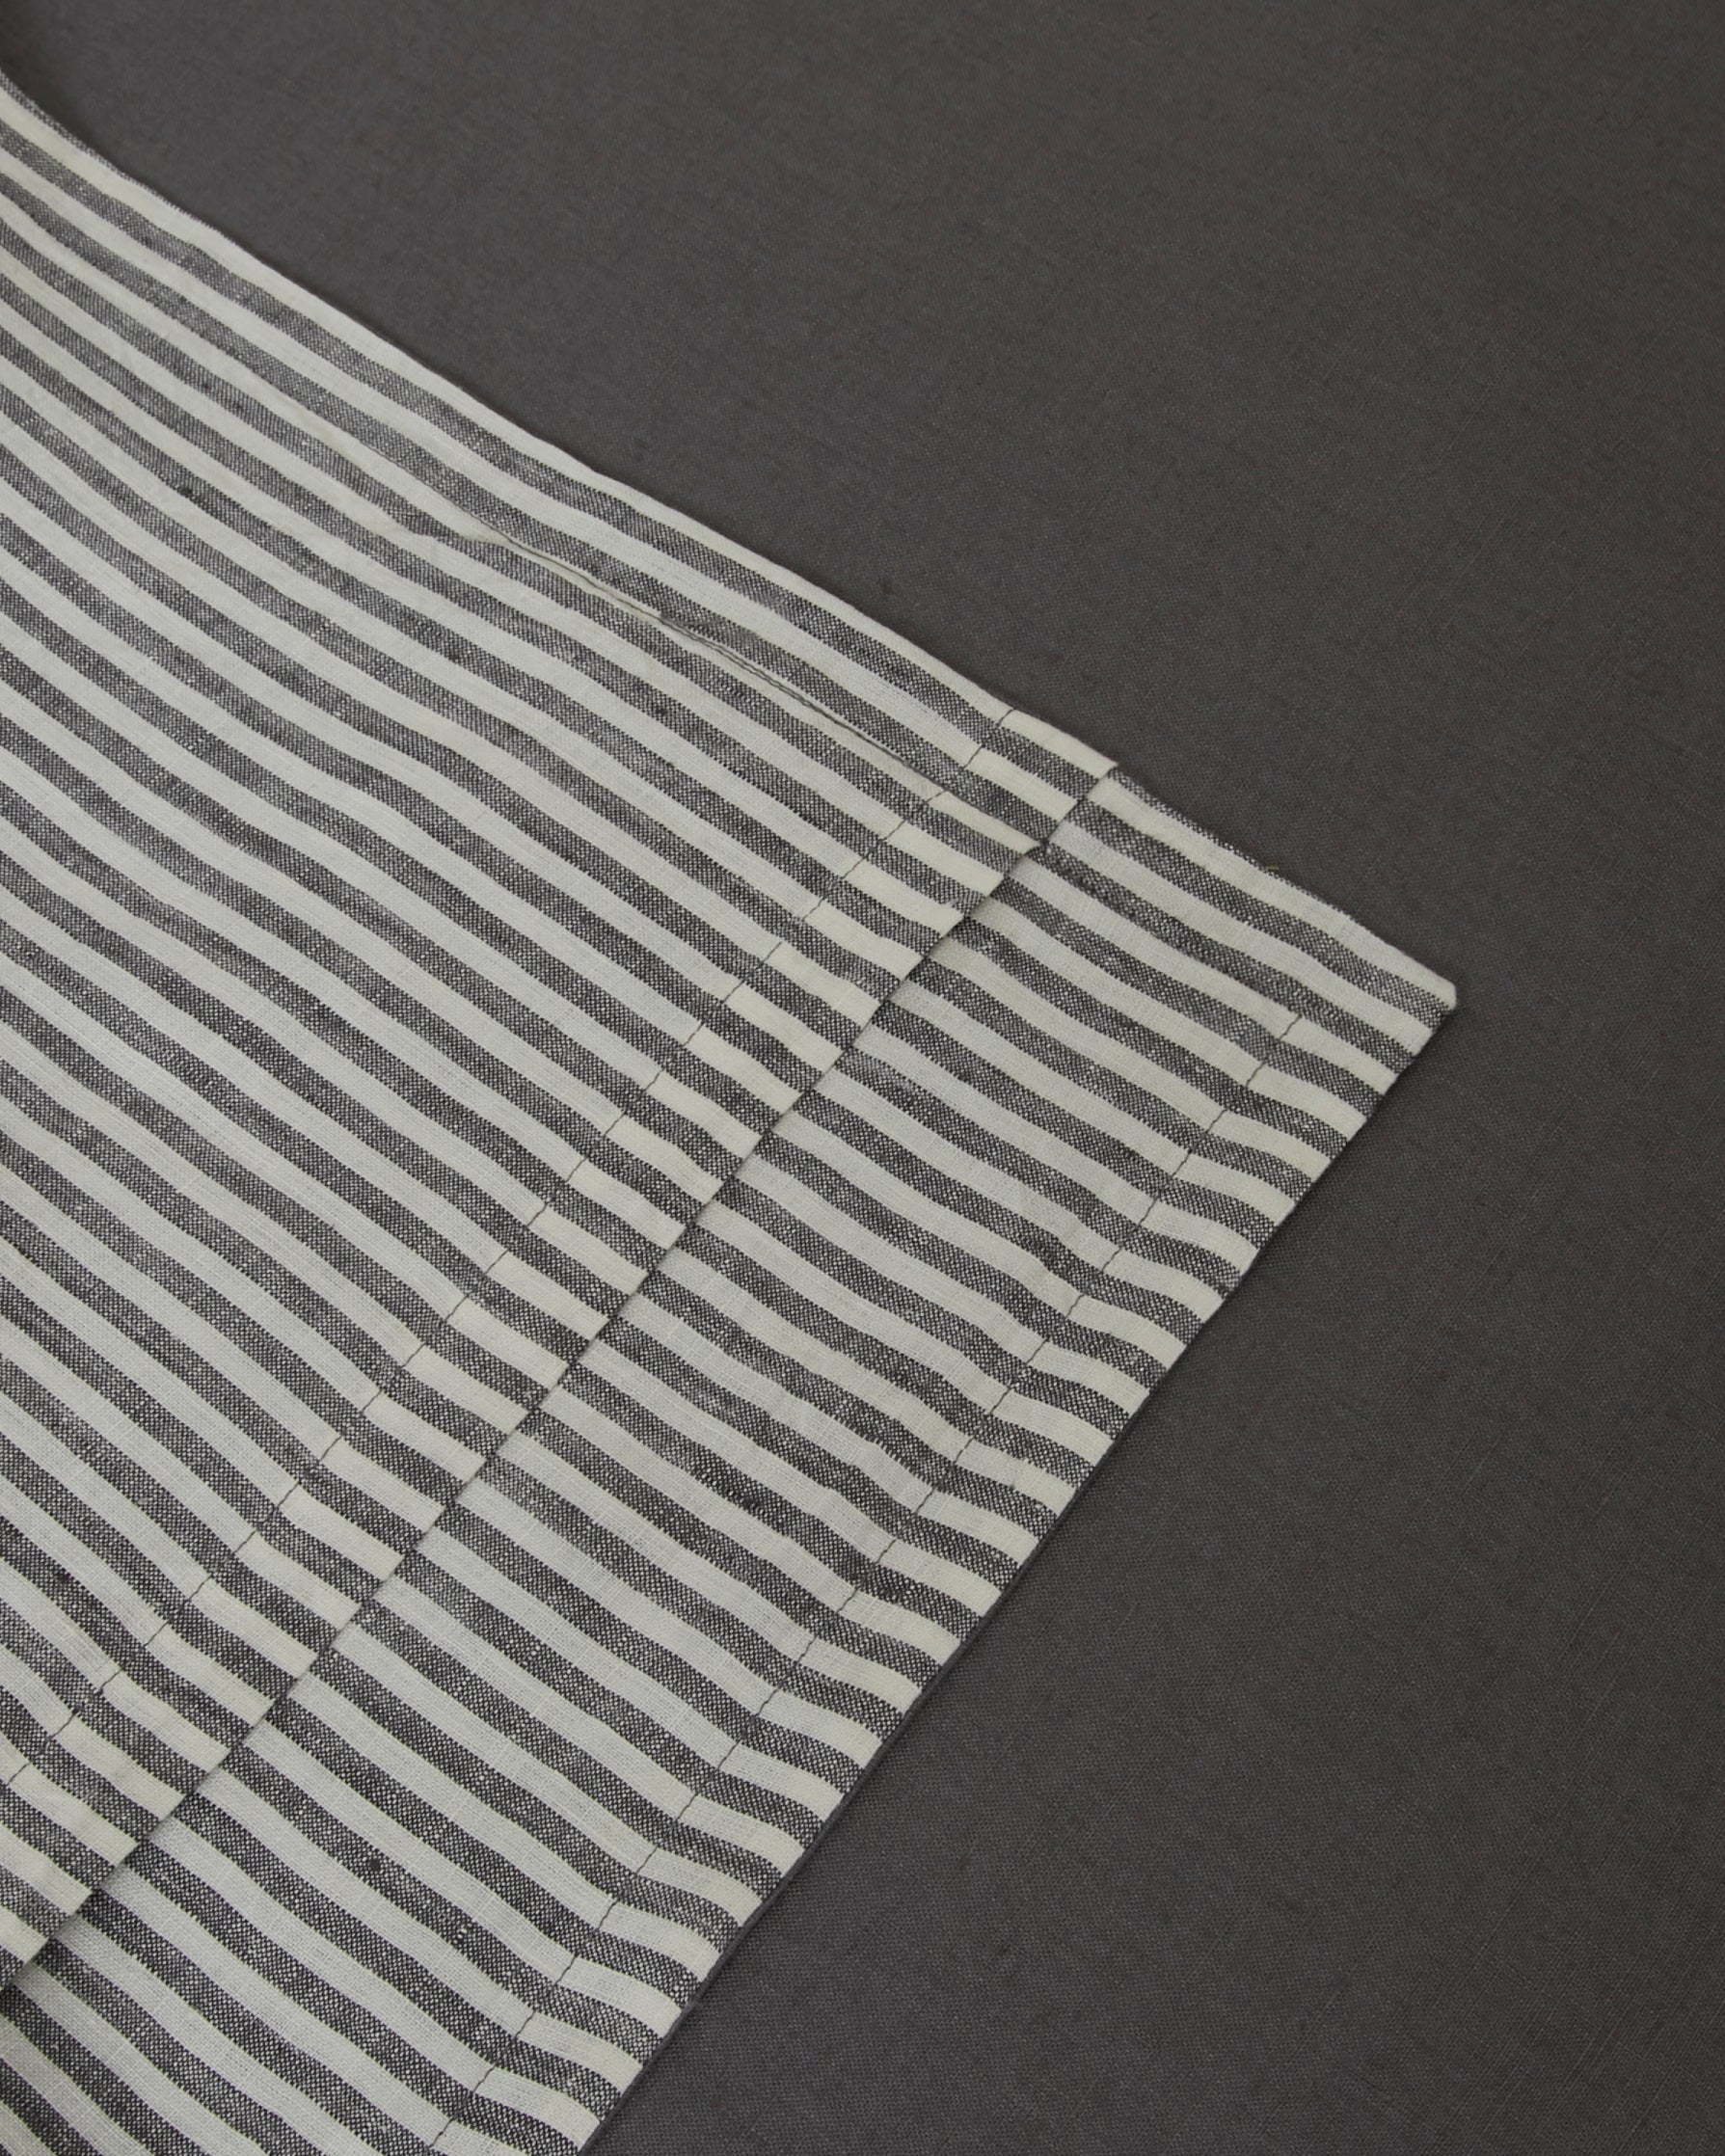 Pair of filled pillowcases in storm and storm stripe dark gray